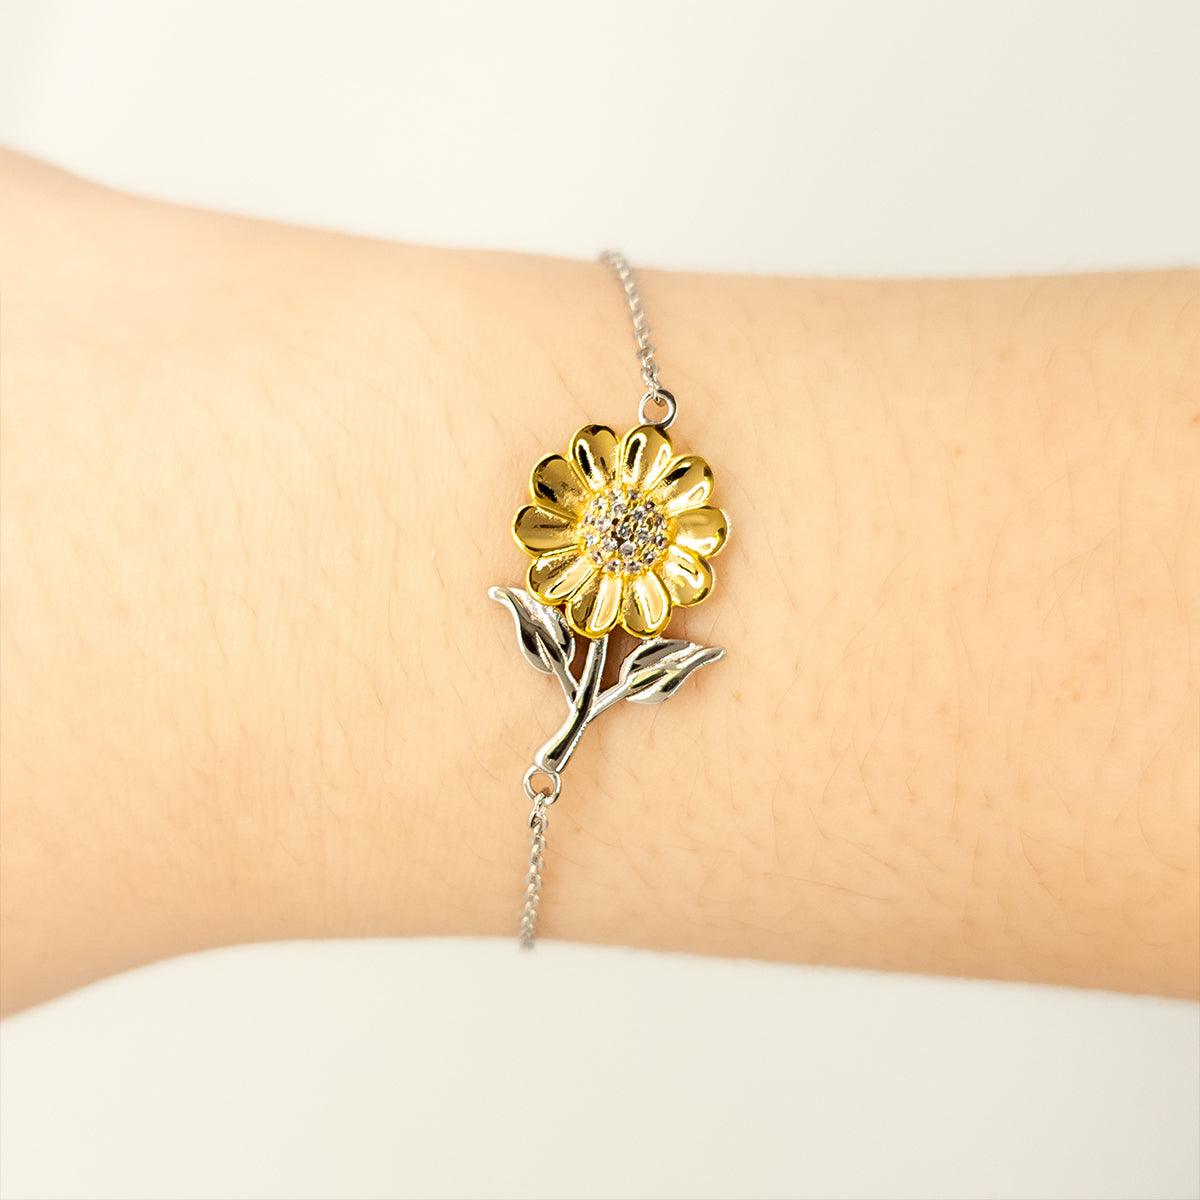 CPA Sunflower Bracelet - Thanks for being who you are - Birthday Christmas Jewelry Gifts Coworkers Colleague Boss - Mallard Moon Gift Shop